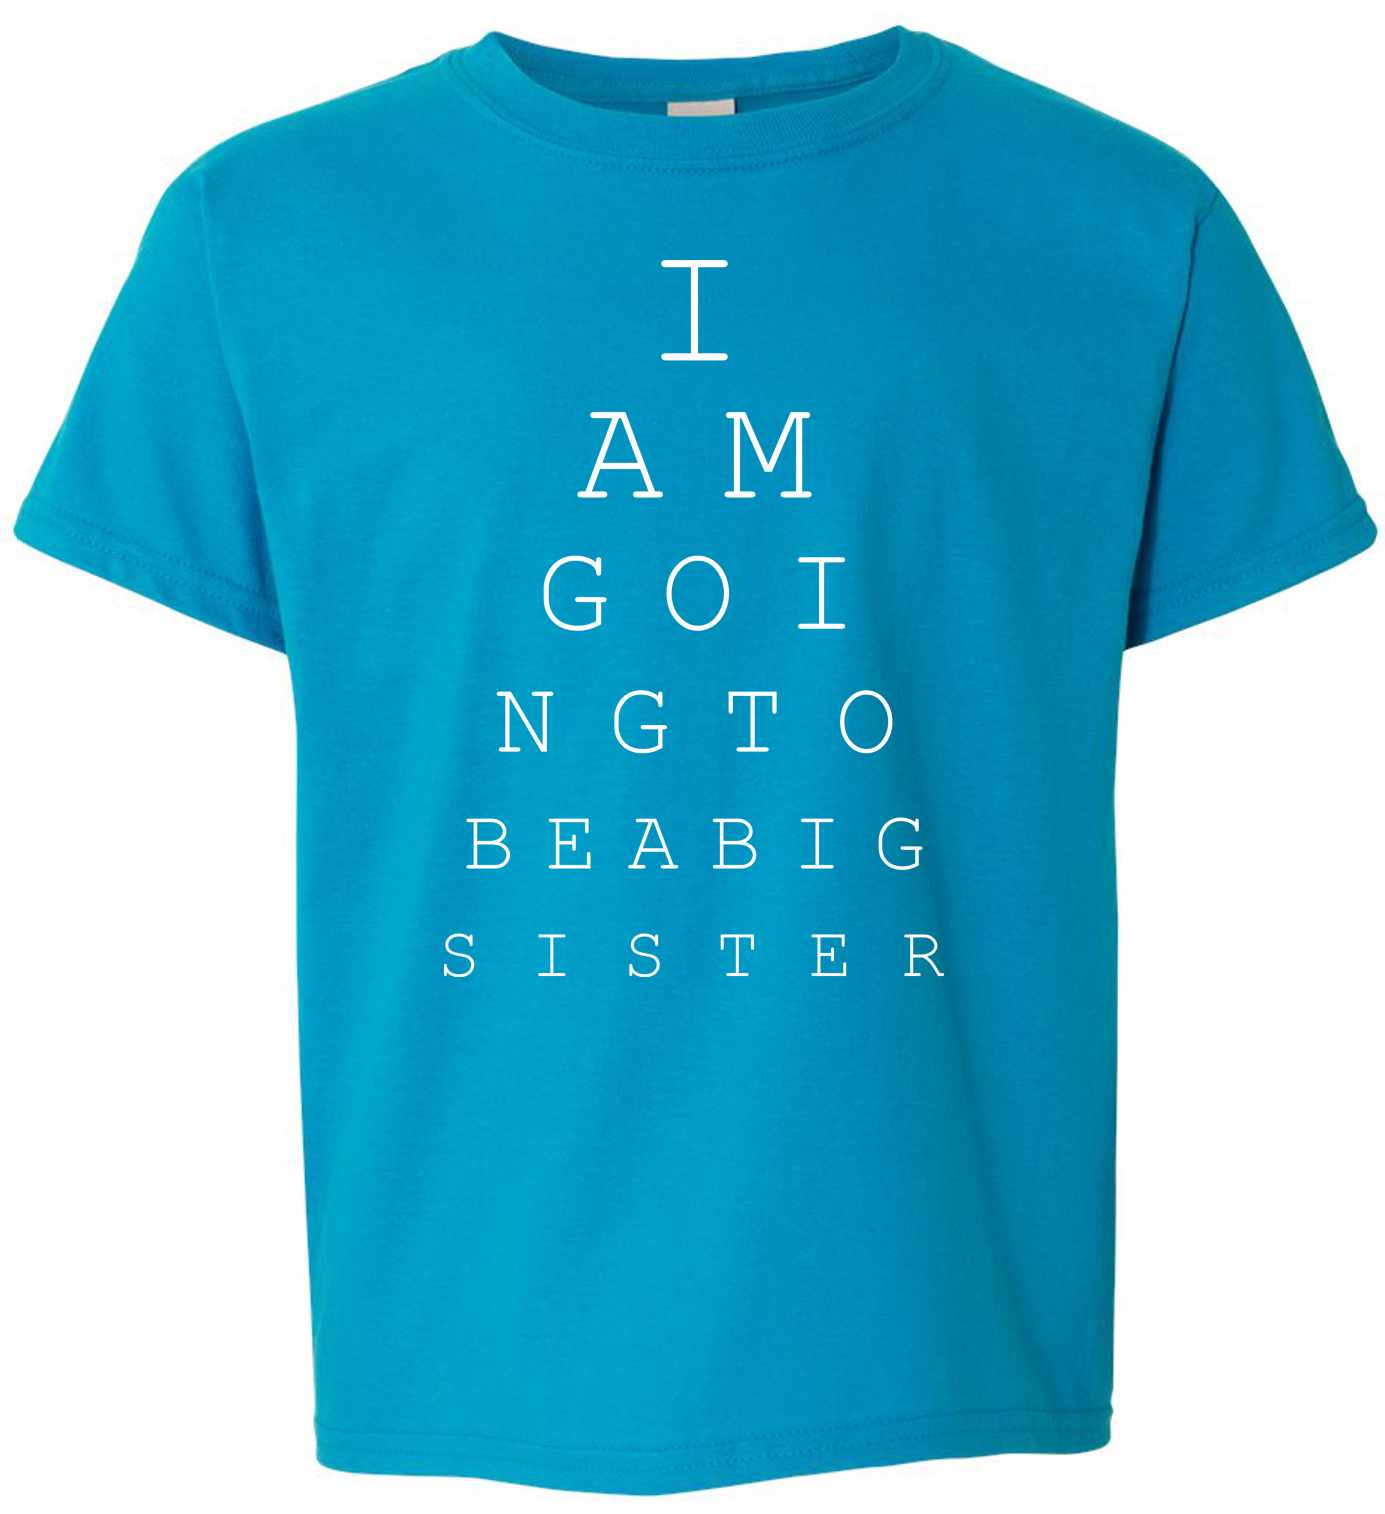 I AM GOING TO BE A BIG SISTER EYE CHART on Kids T-Shirt (#1160-201)